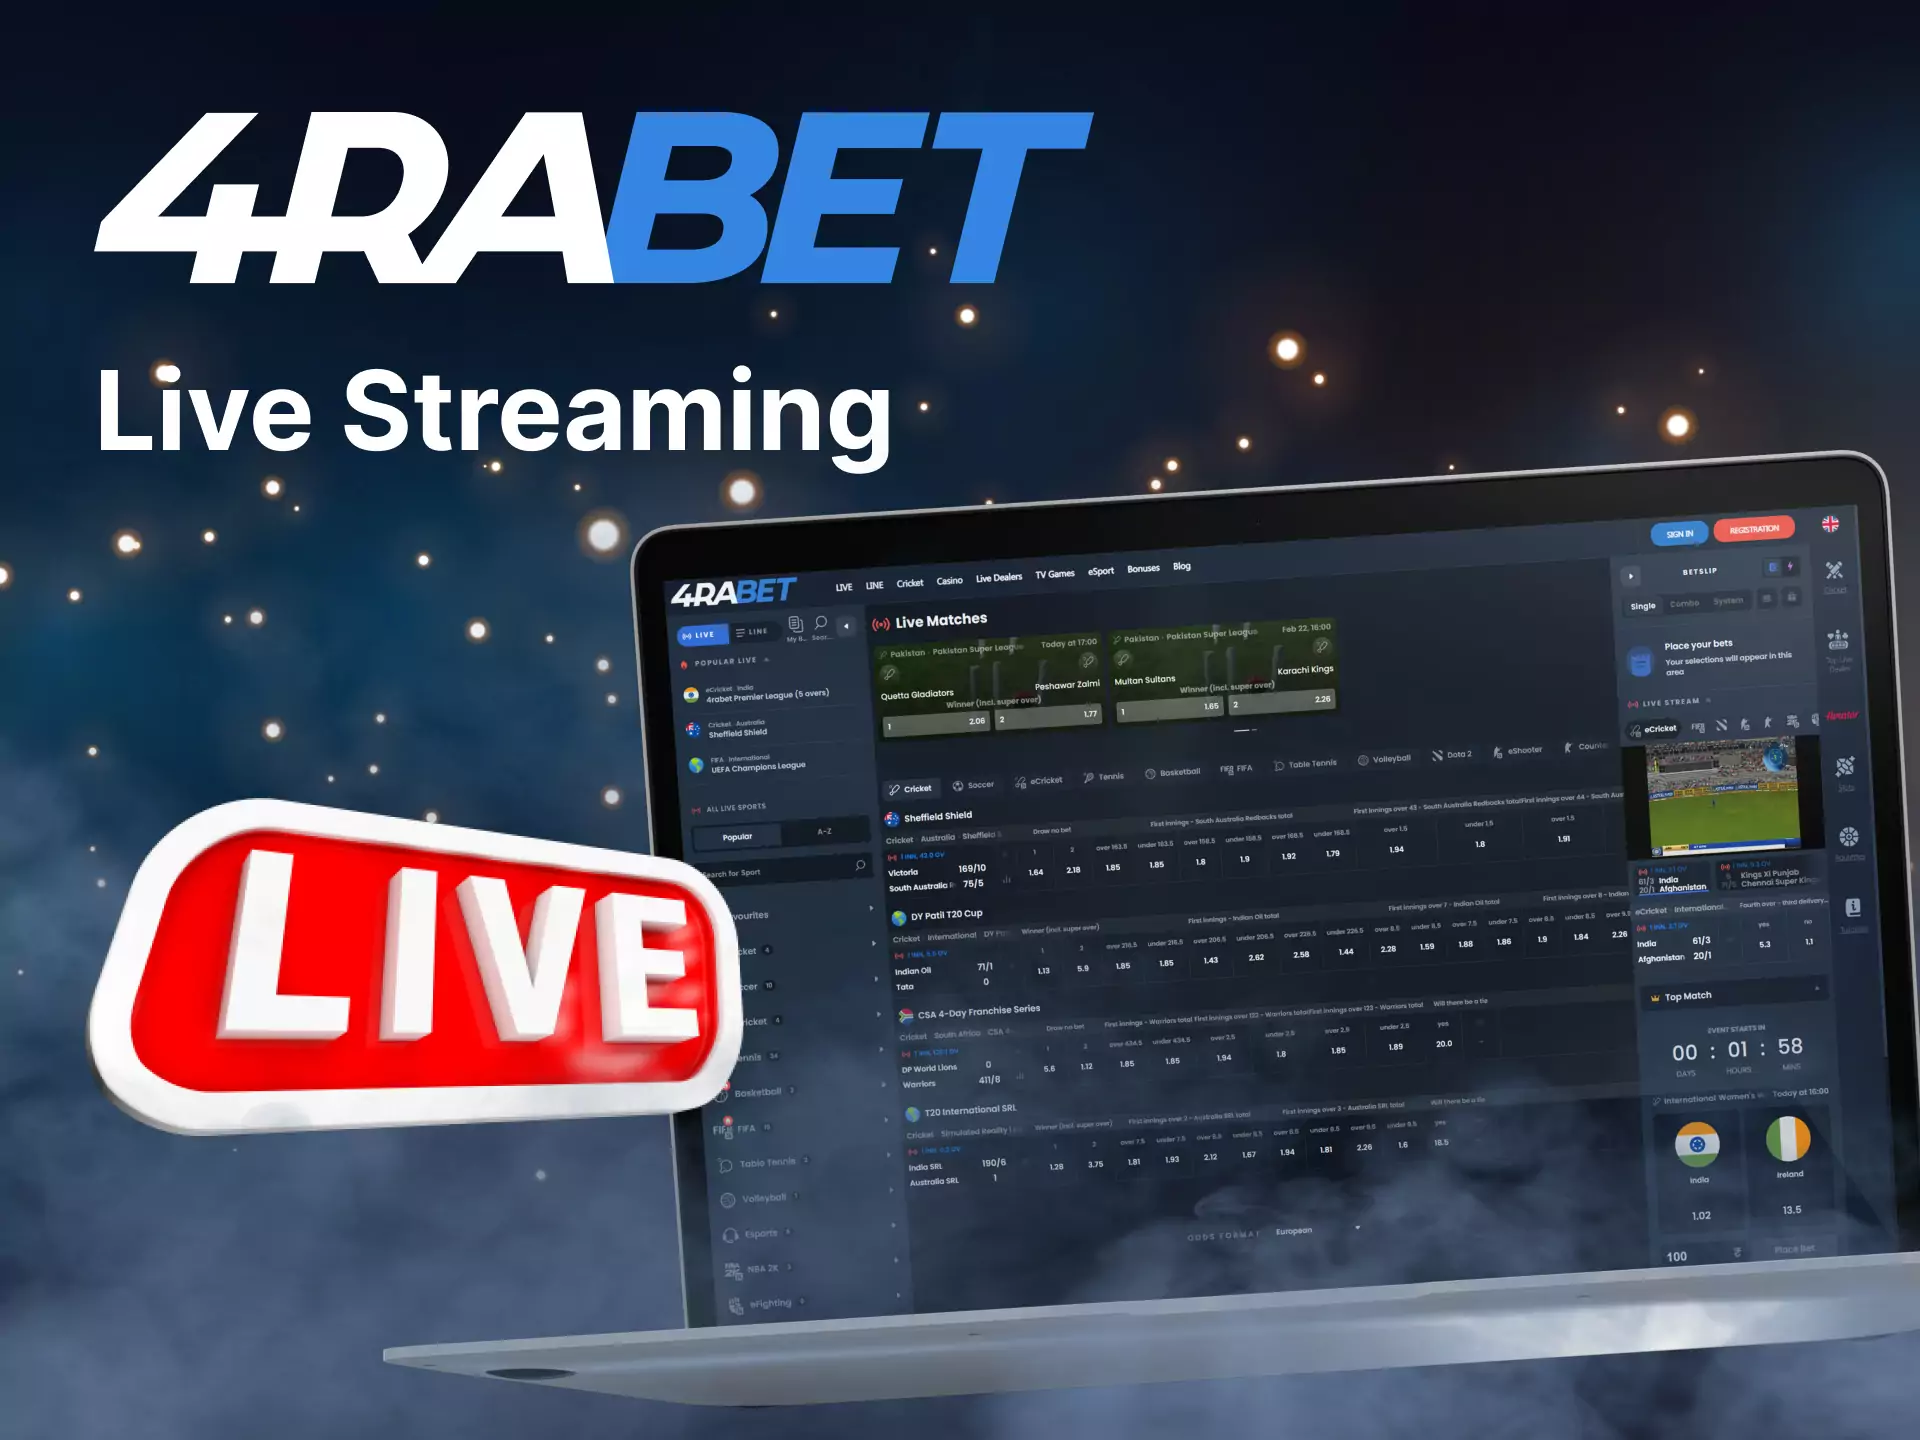 At 4rabet you can place bets while the games are being streamed live.